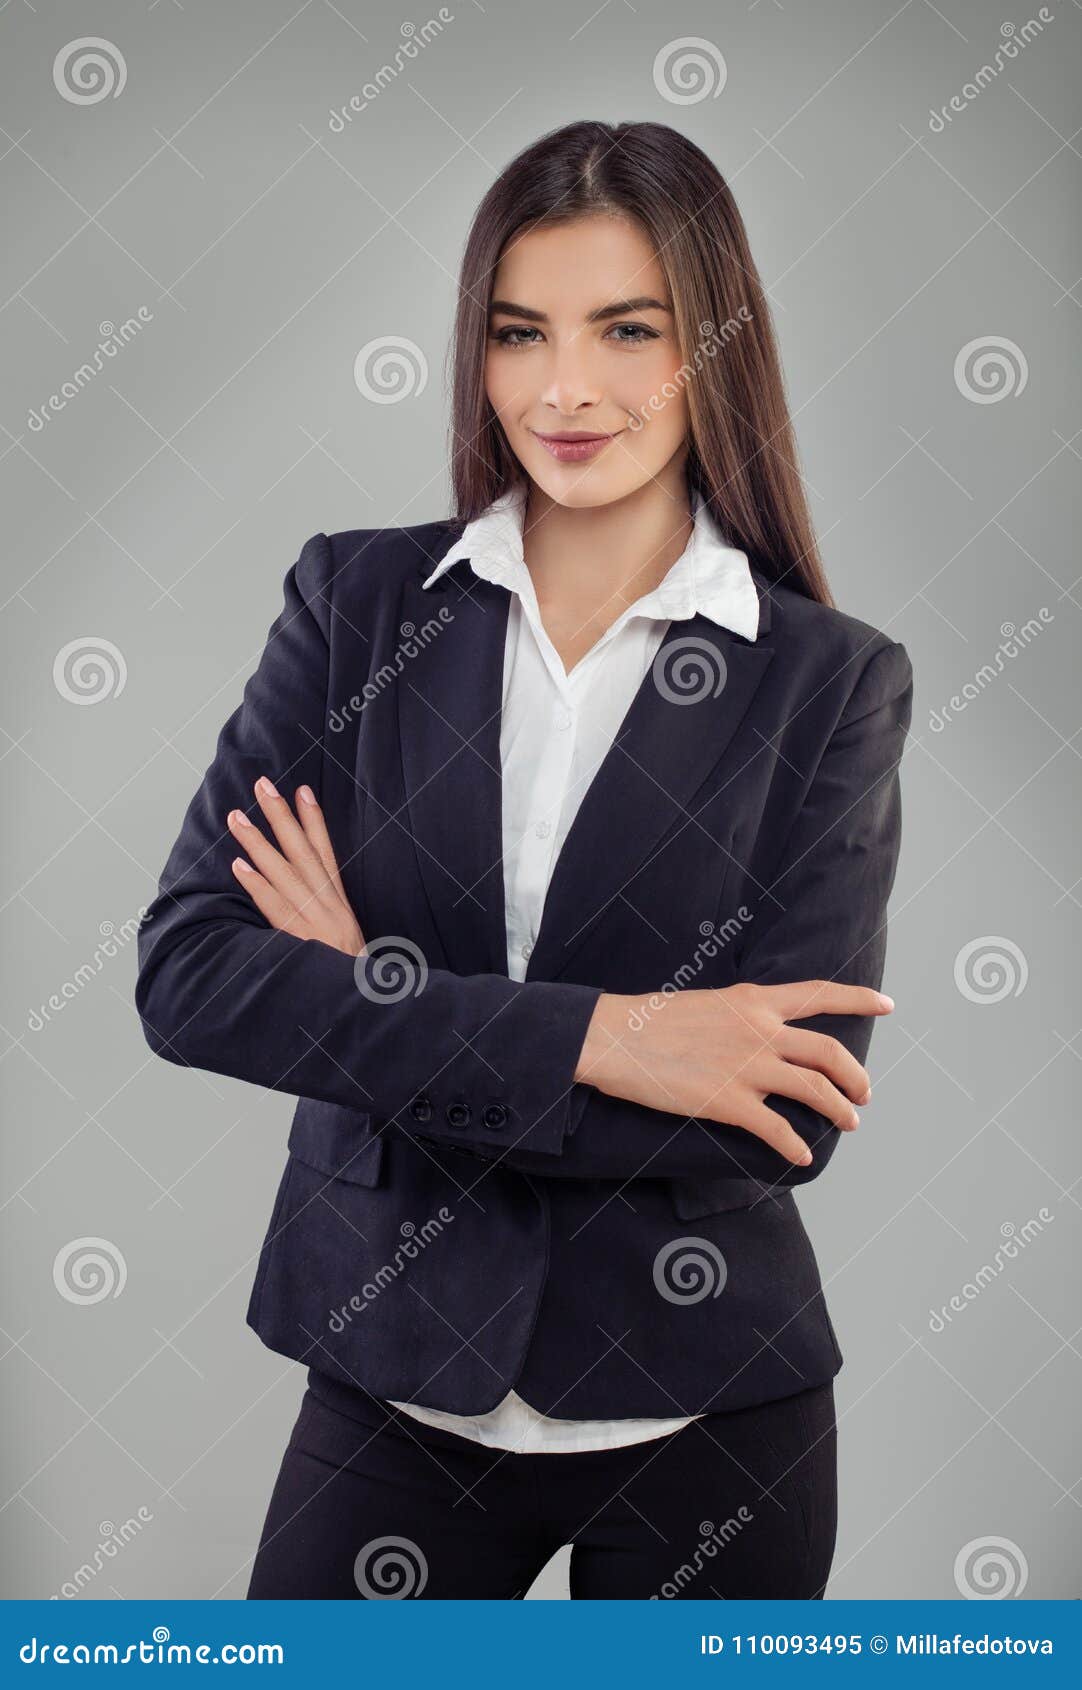 Casual Business Woman with Arms Crossed Stock Image - Image of leading ...